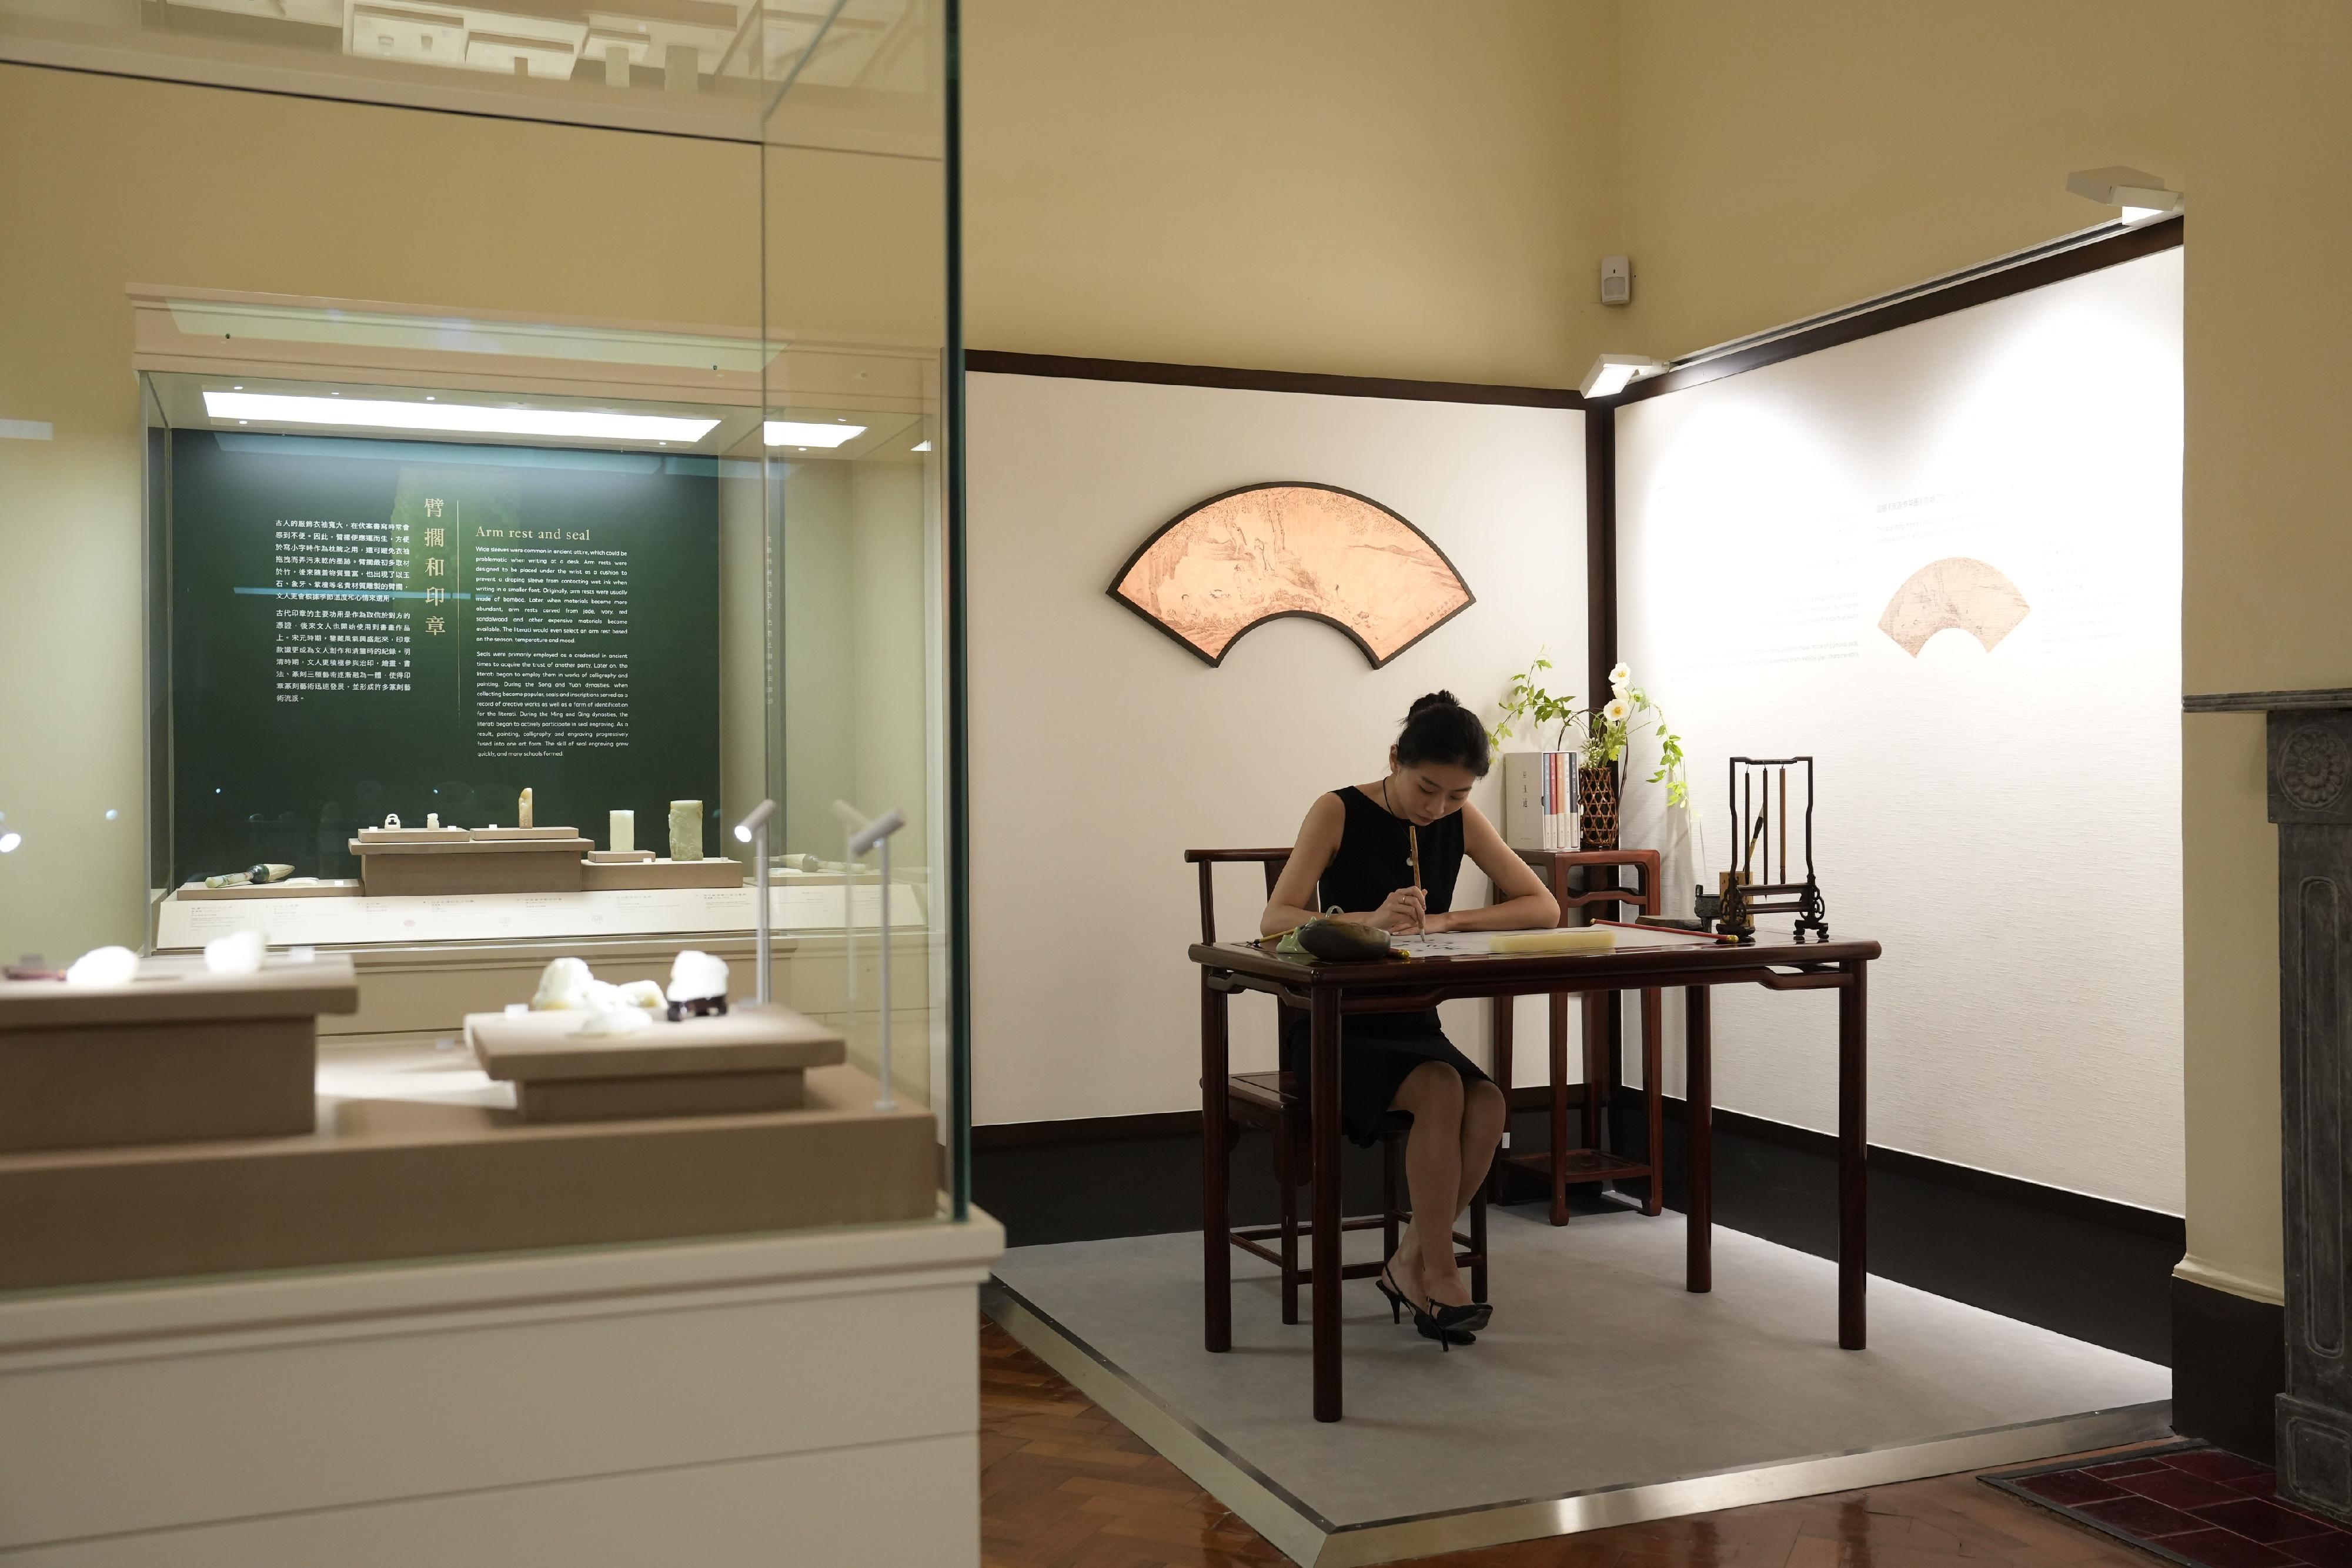 The Flagstaff House Museum of Tea Ware today (August 2) stages the exhibition "The Art of Living: Stationery and Tea Accessories of the Chinese Literati", featuring nearly 100 sets of stationery items and tea accessories of the Ming and Qing dynasties to illustrate the passion for antiquity and aesthetics of the Chinese literati. 